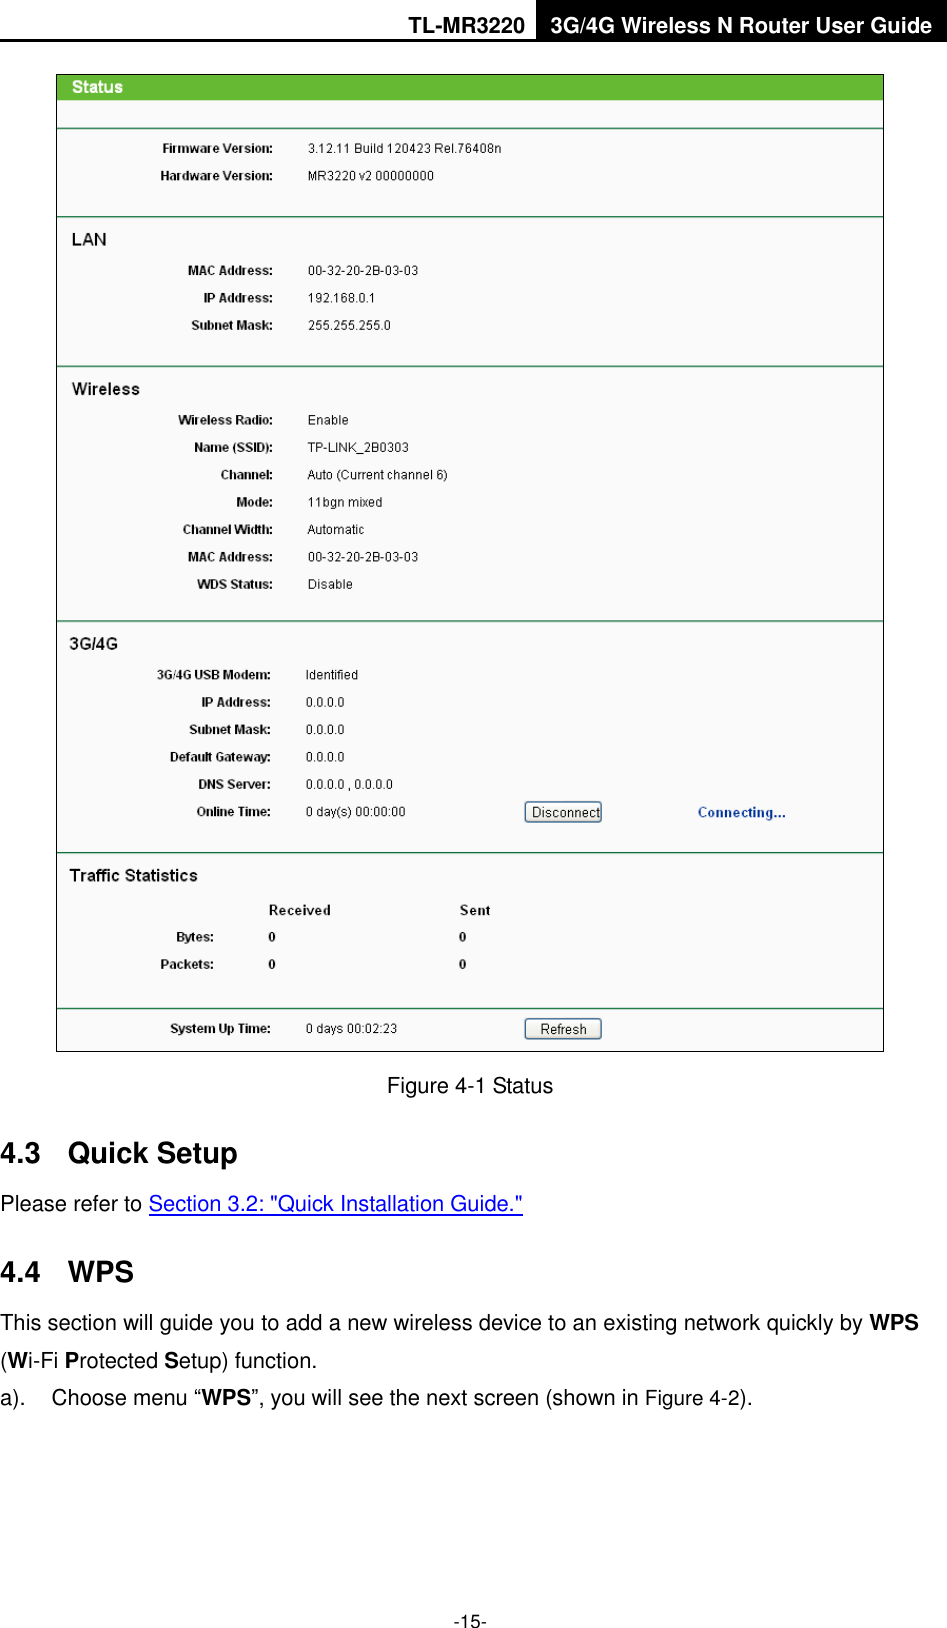 TL-MR3220 3G/4G Wireless N Router User Guide  -15-  Figure 4-1 Status 4.3  Quick Setup Please refer to Section 3.2: &quot;Quick Installation Guide.&quot; 4.4  WPS This section will guide you to add a new wireless device to an existing network quickly by WPS (Wi-Fi Protected Setup) function.   a).  Choose menu “WPS”, you will see the next screen (shown in Figure 4-2). 